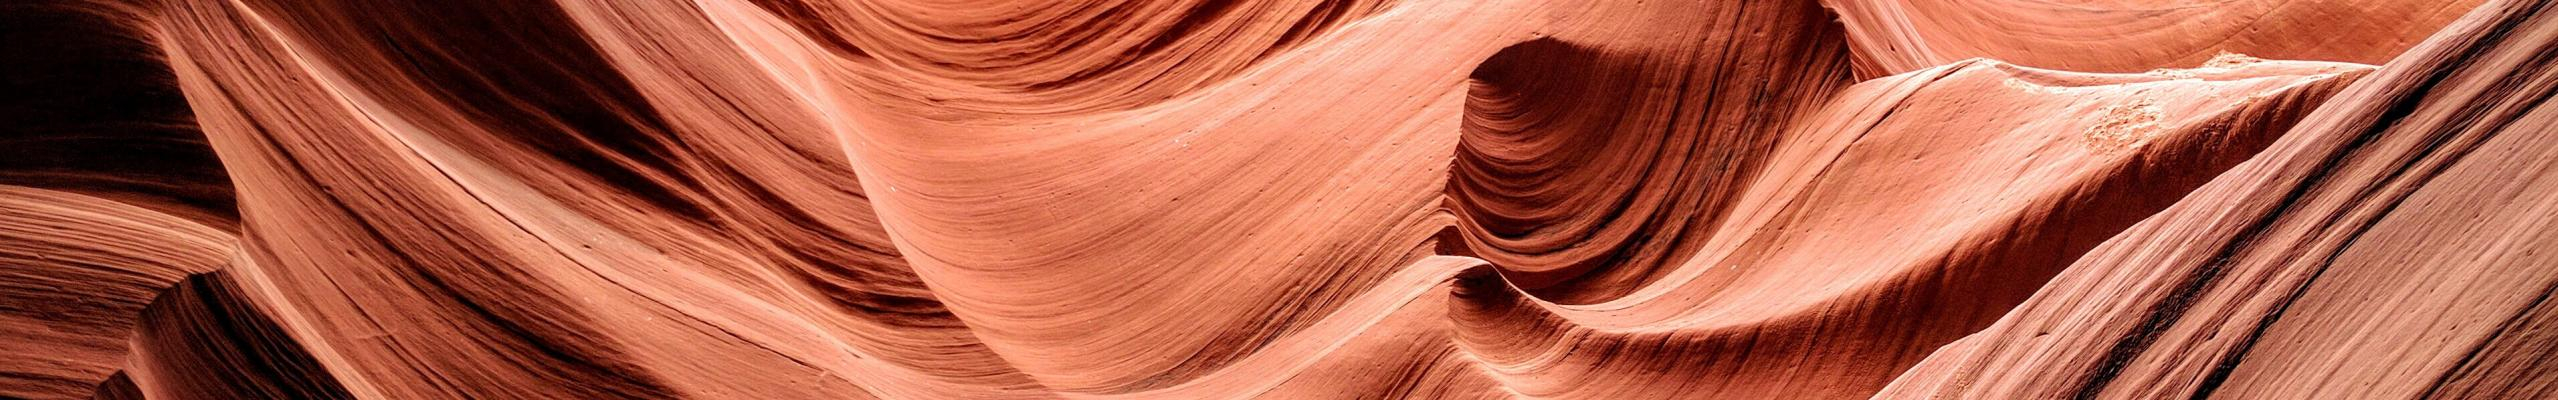 red sandstone in Antelope Canyon